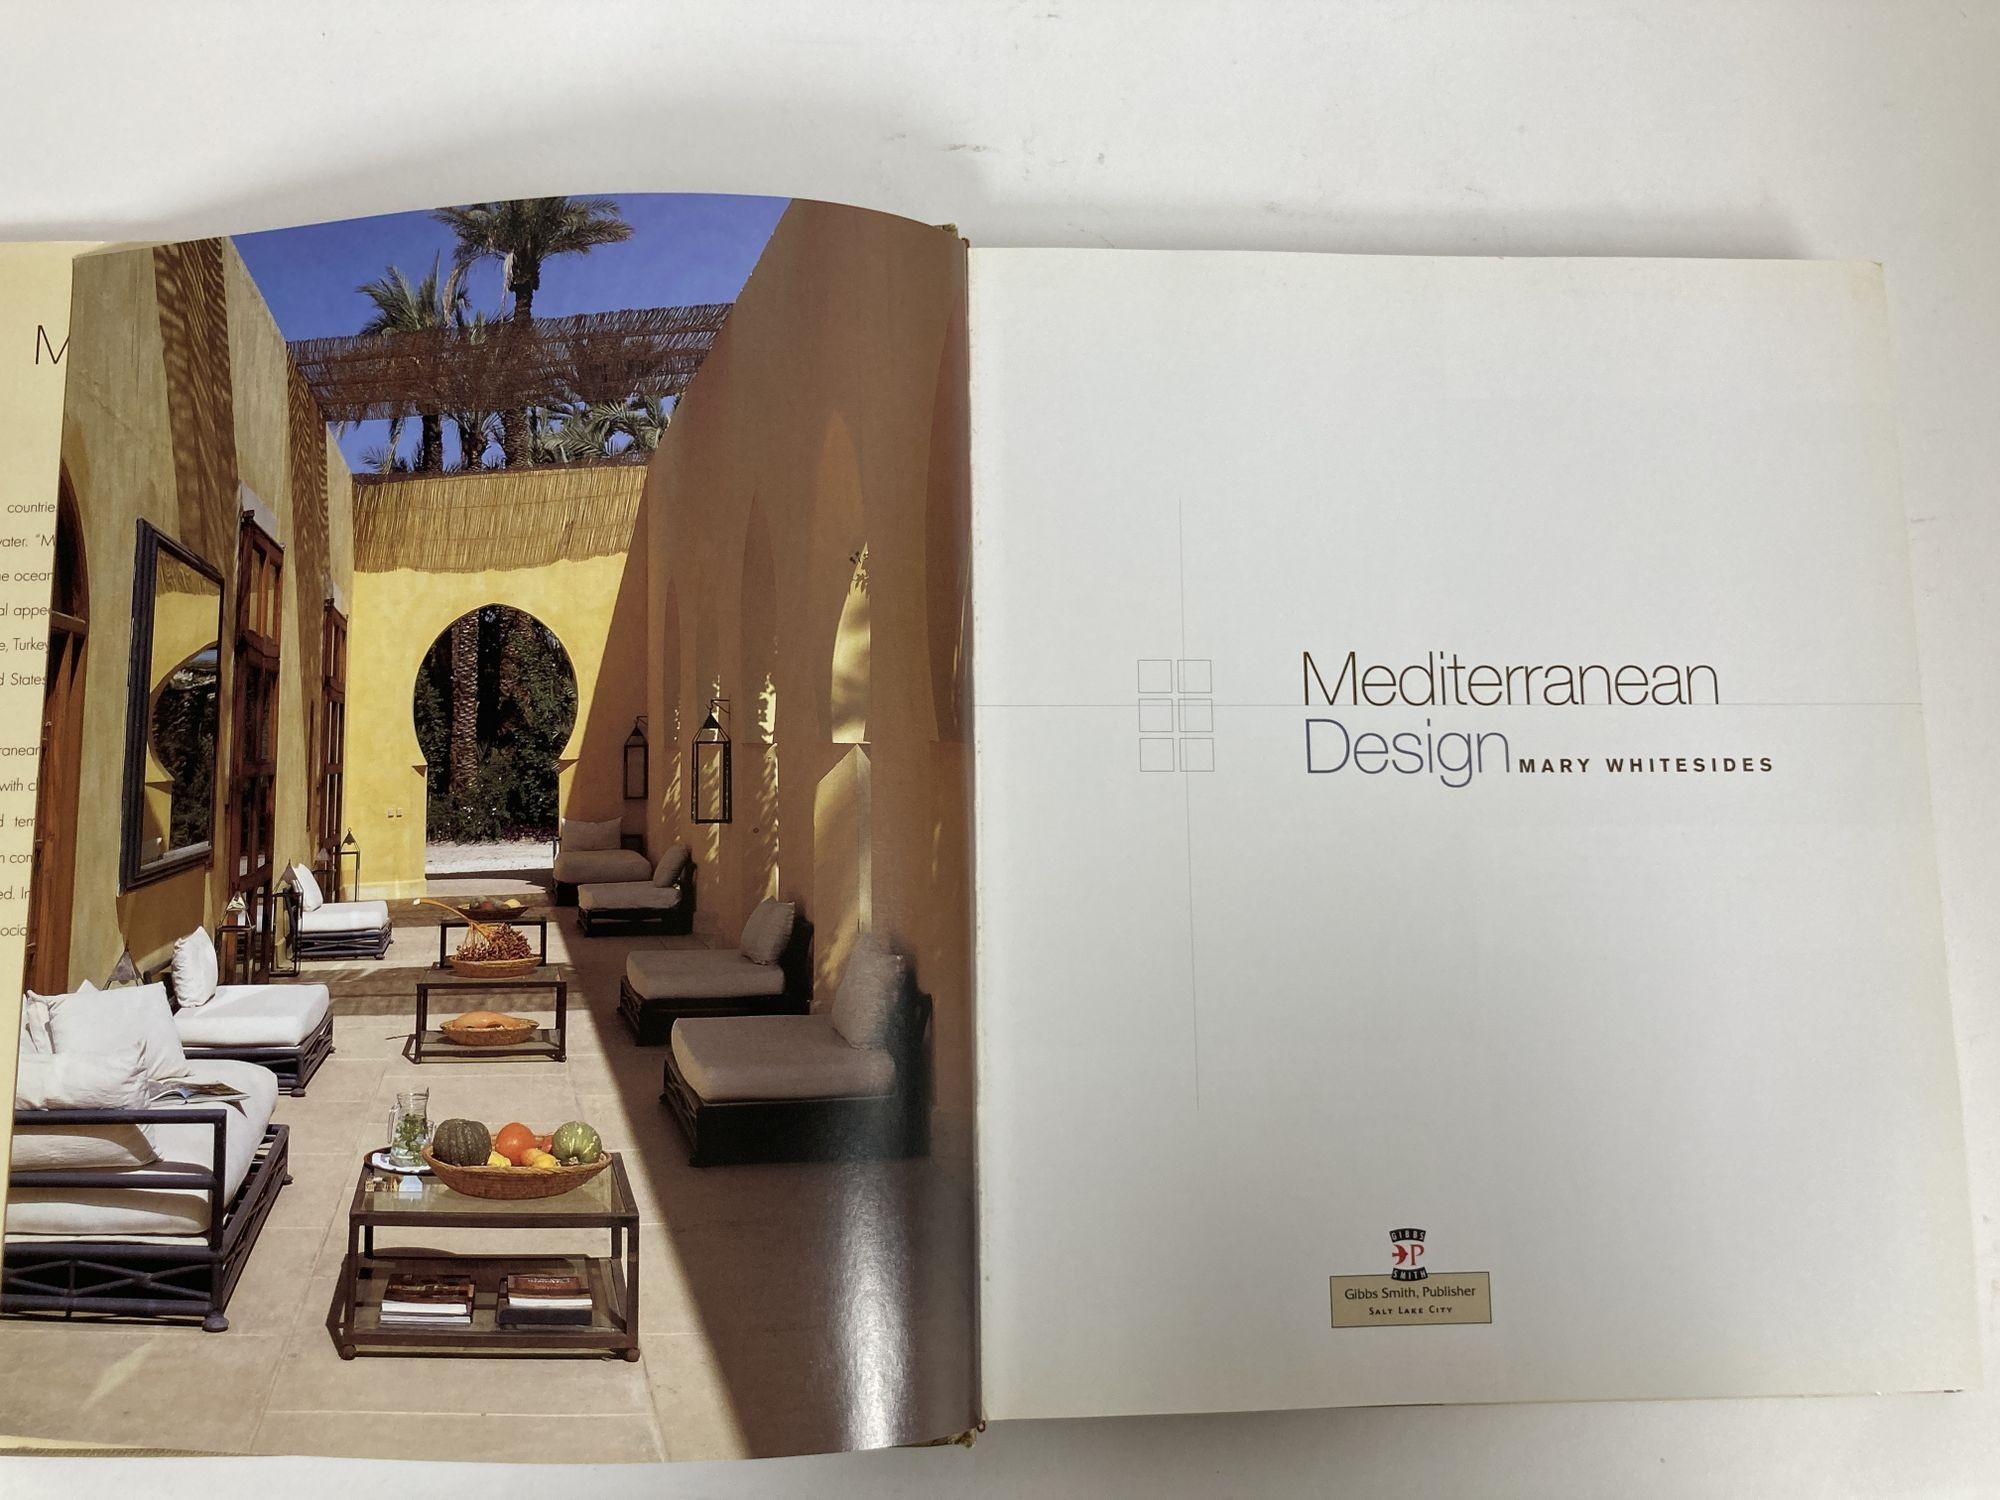 American Mediterranean Design Book by Mary Whitesides 1st Edition, 2006 For Sale